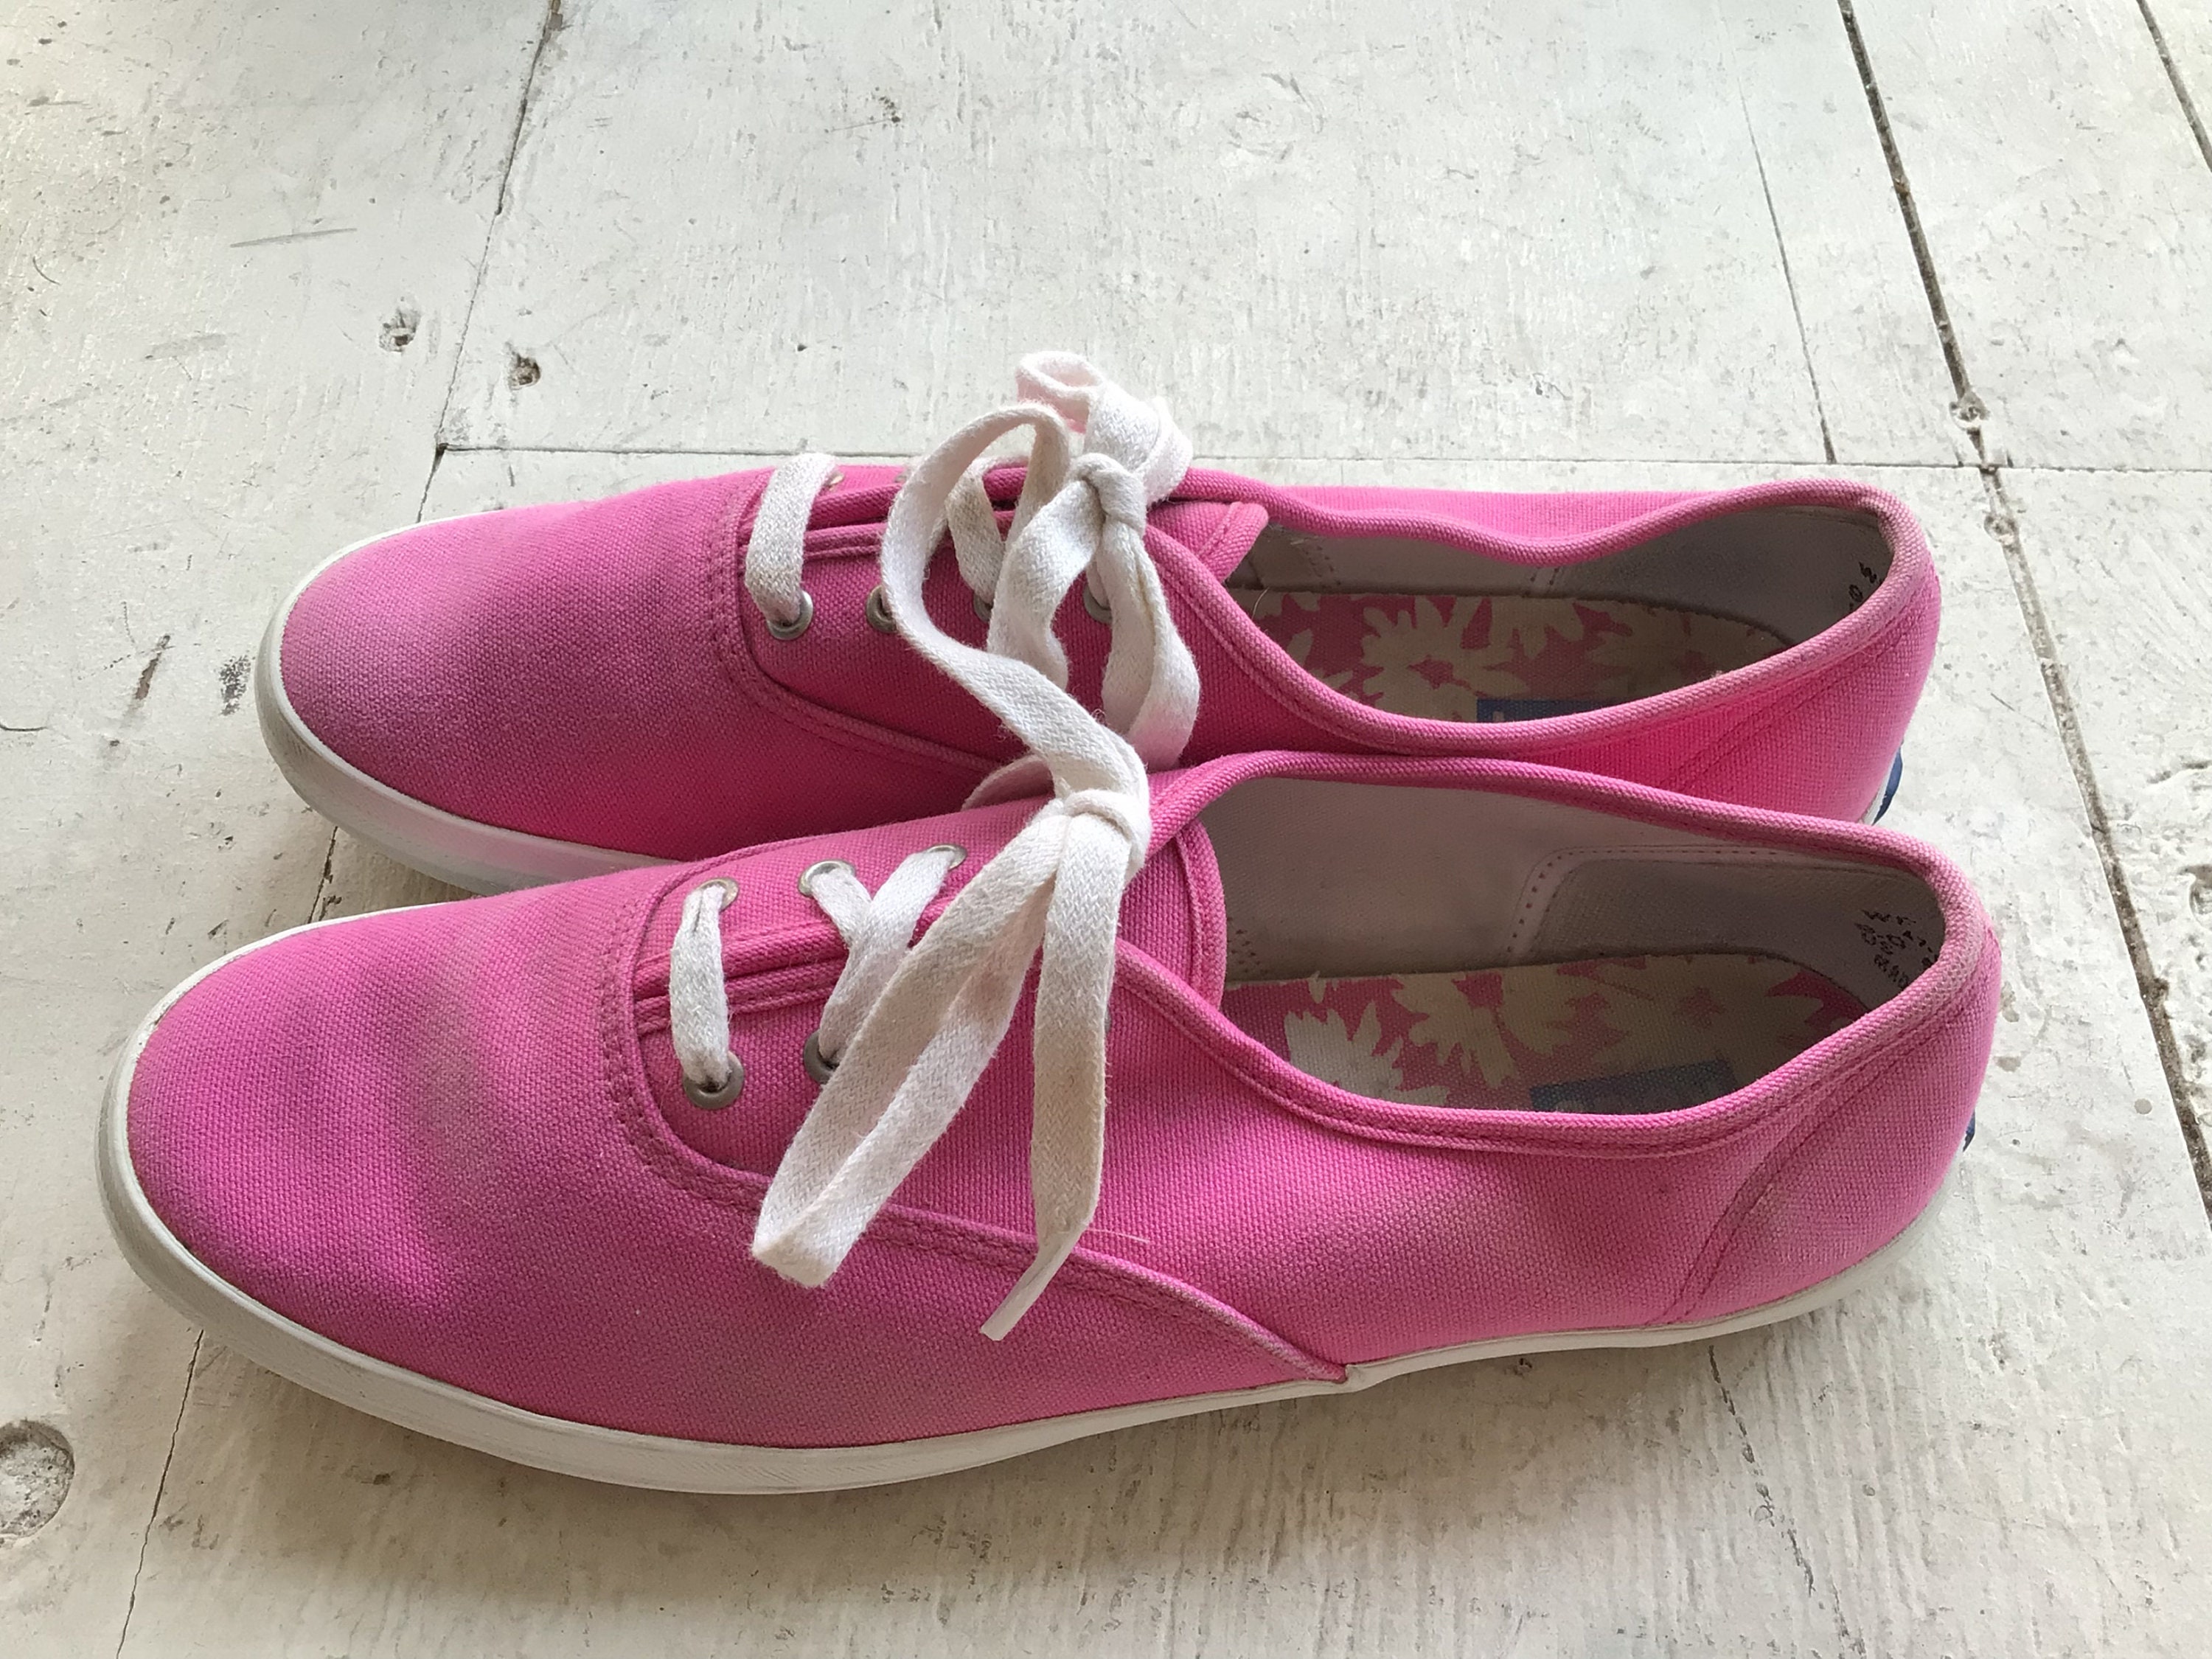 Ladies Rookie Neon Pink/Yellow Textile Canvas Shoes by Keds retail £9.99 